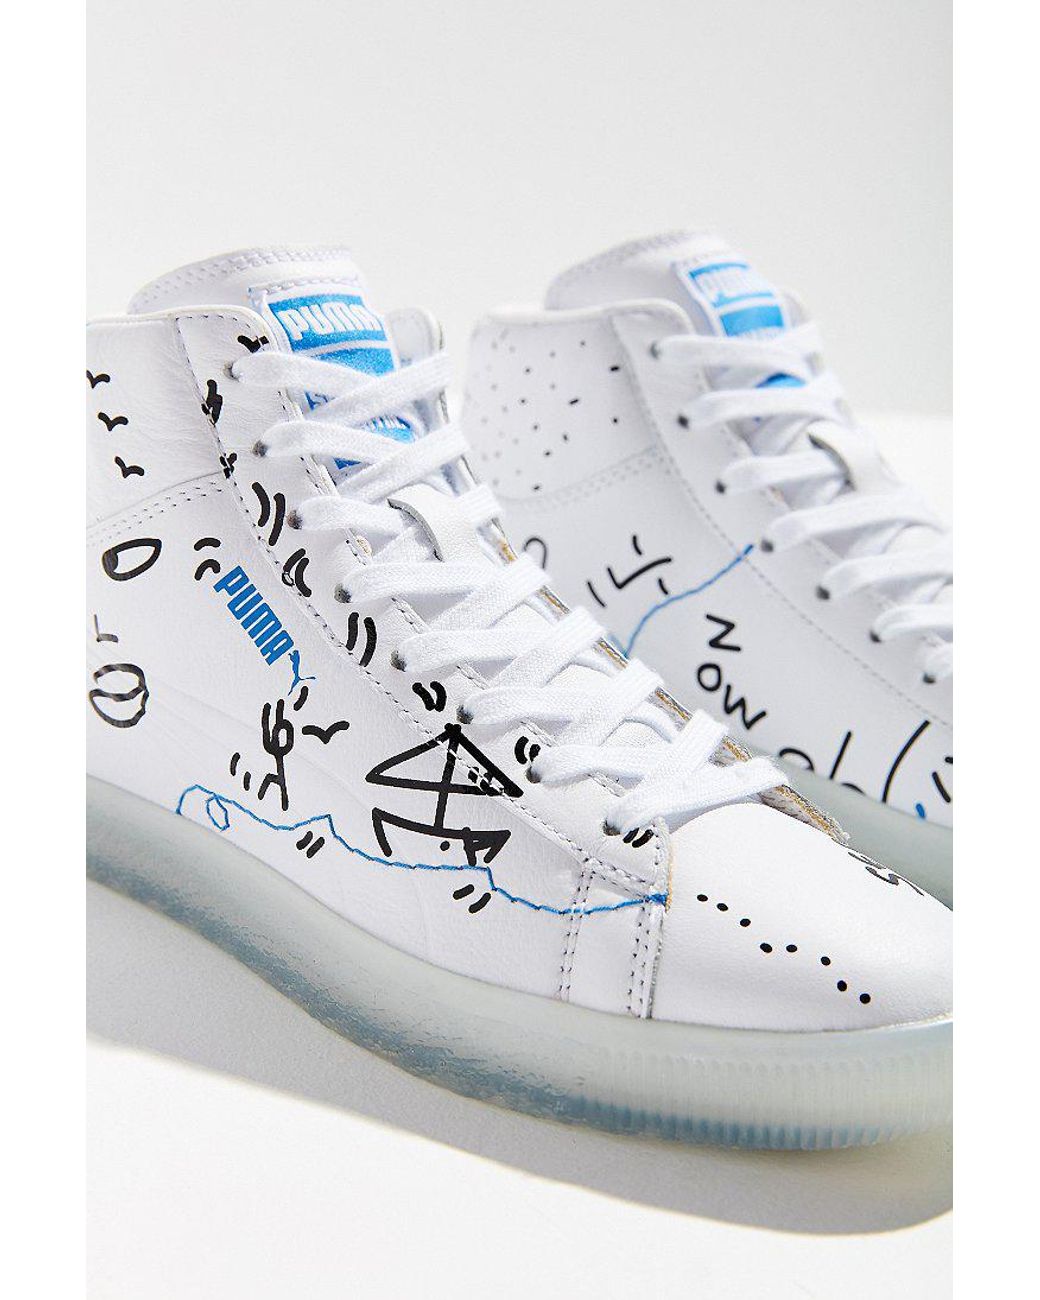 mask pedestal insufficient PUMA Leather Puma X Shantell Martin Clyde Mid Top Sneaker in White | Lyst